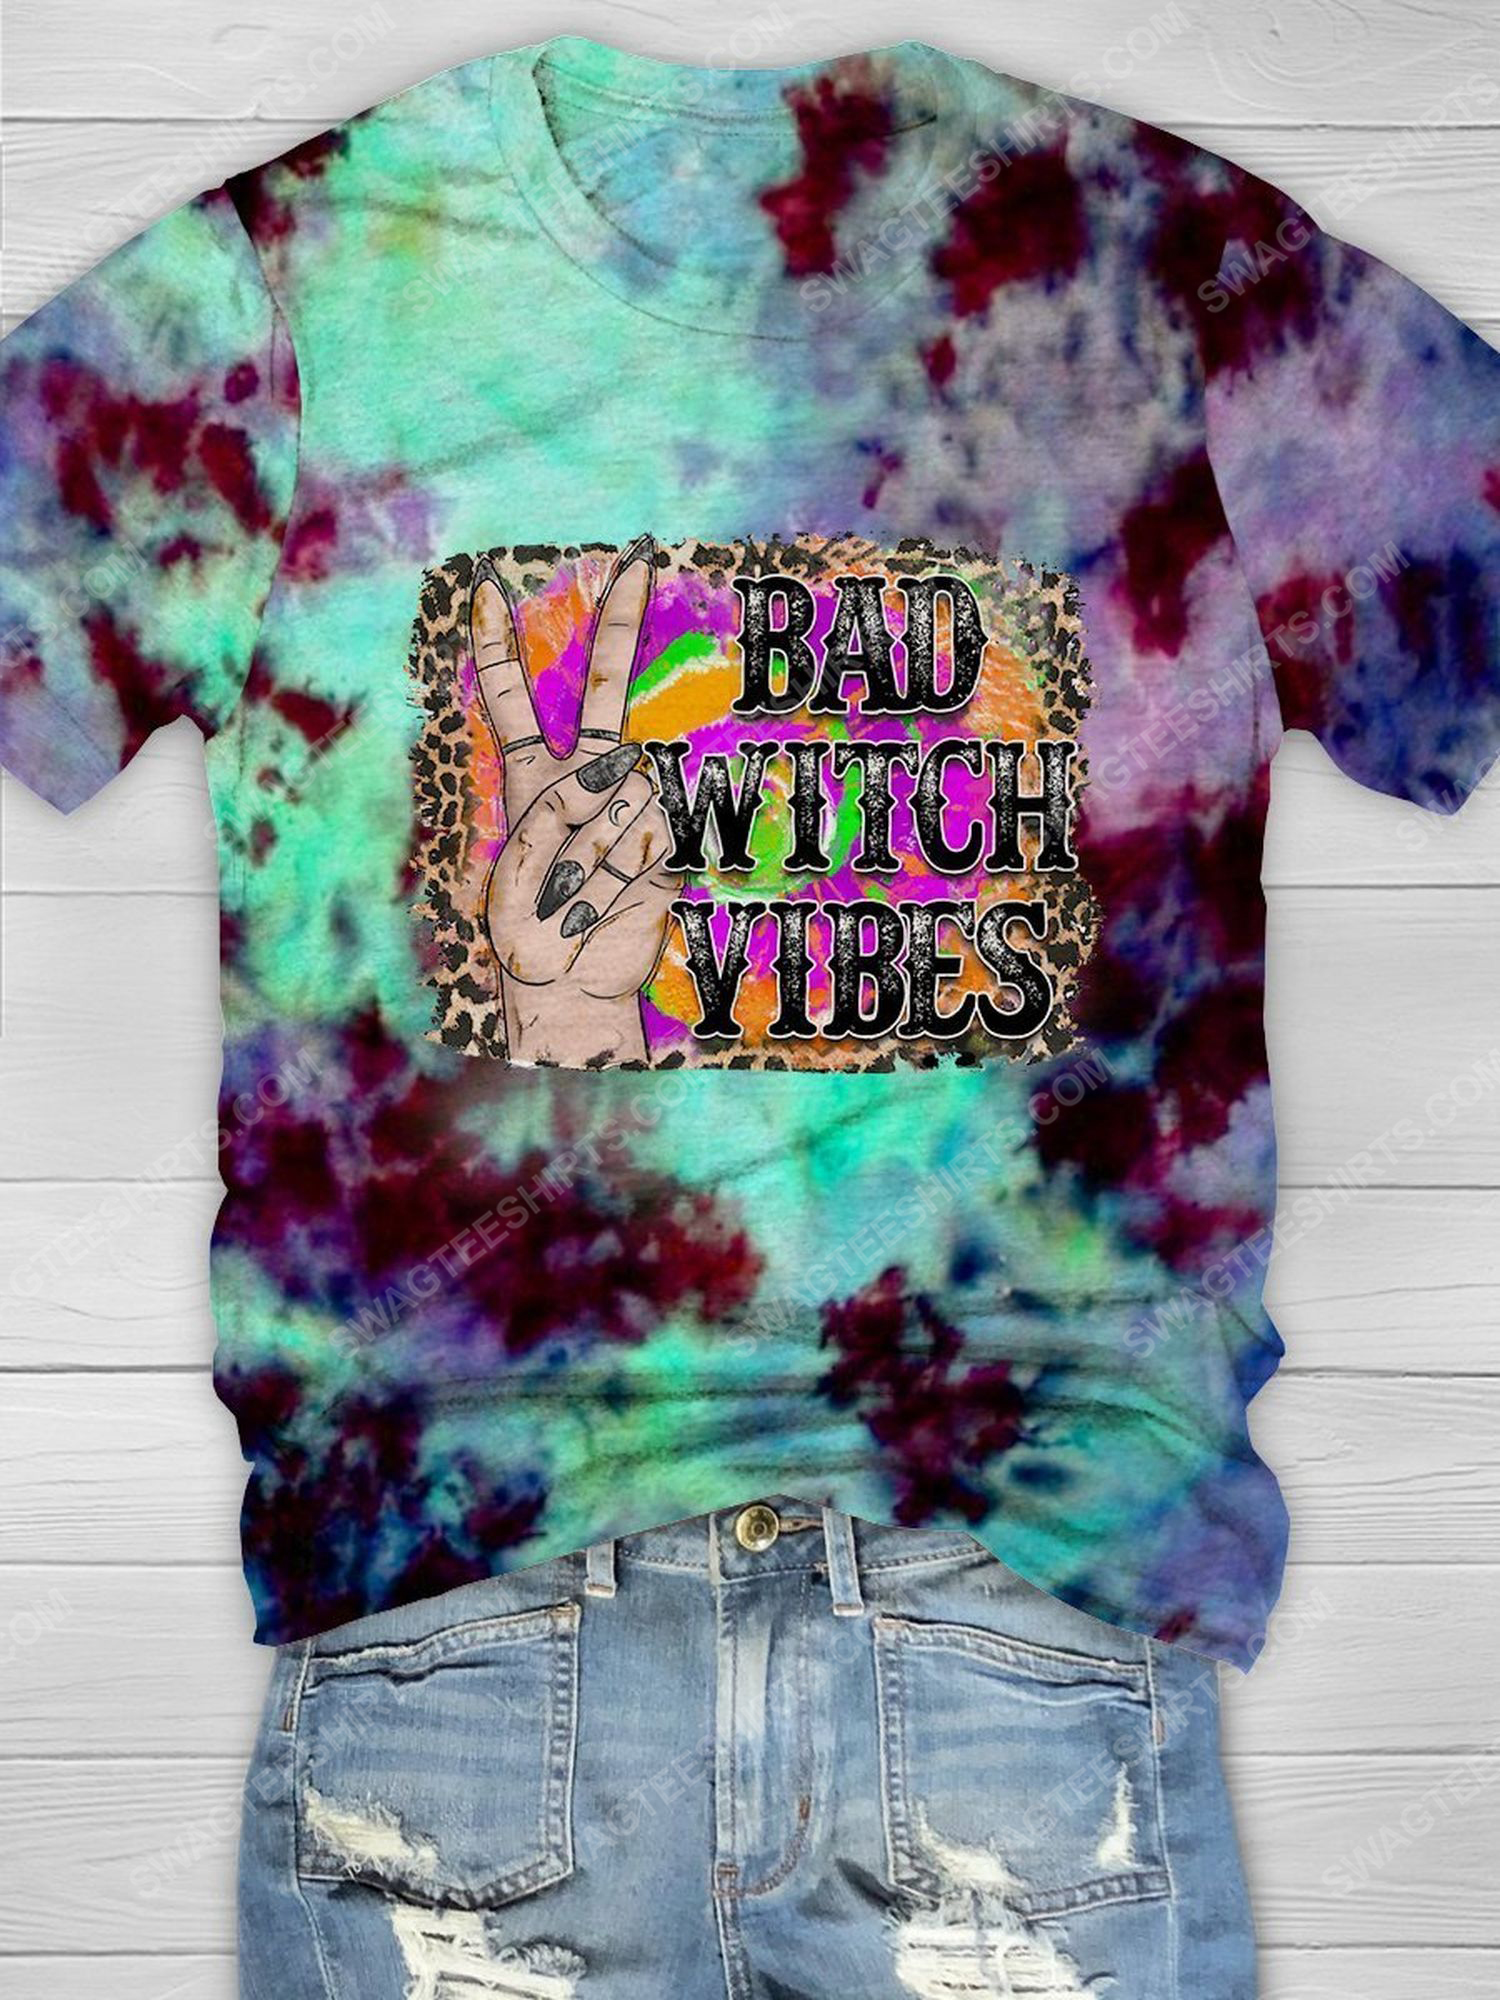 [special edition] Halloween bad witch vibes tie dye shirt – maria (halloween)